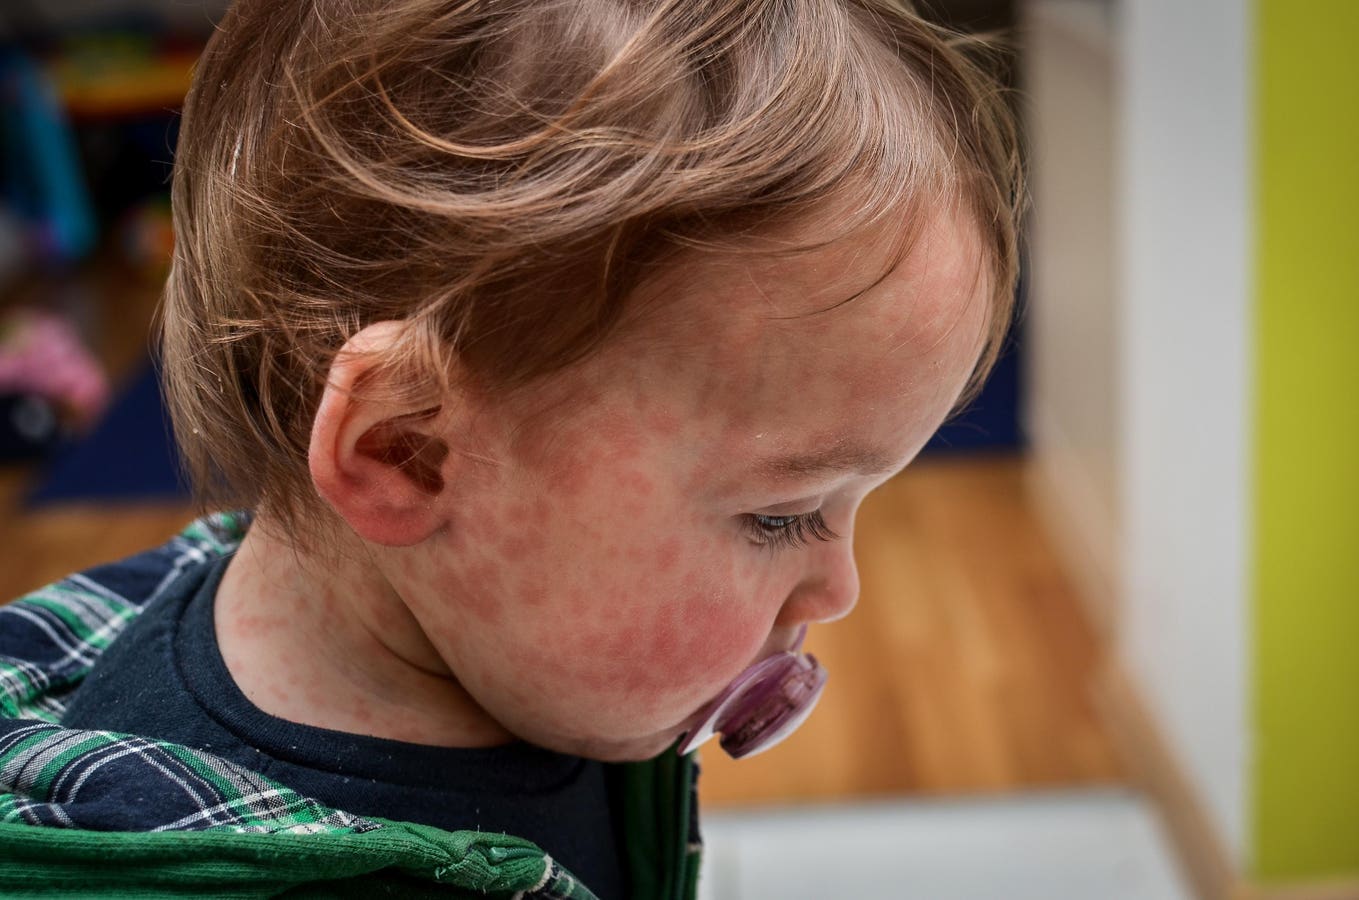 Measles outbreak reported in London as Britain sees continued rise in cases